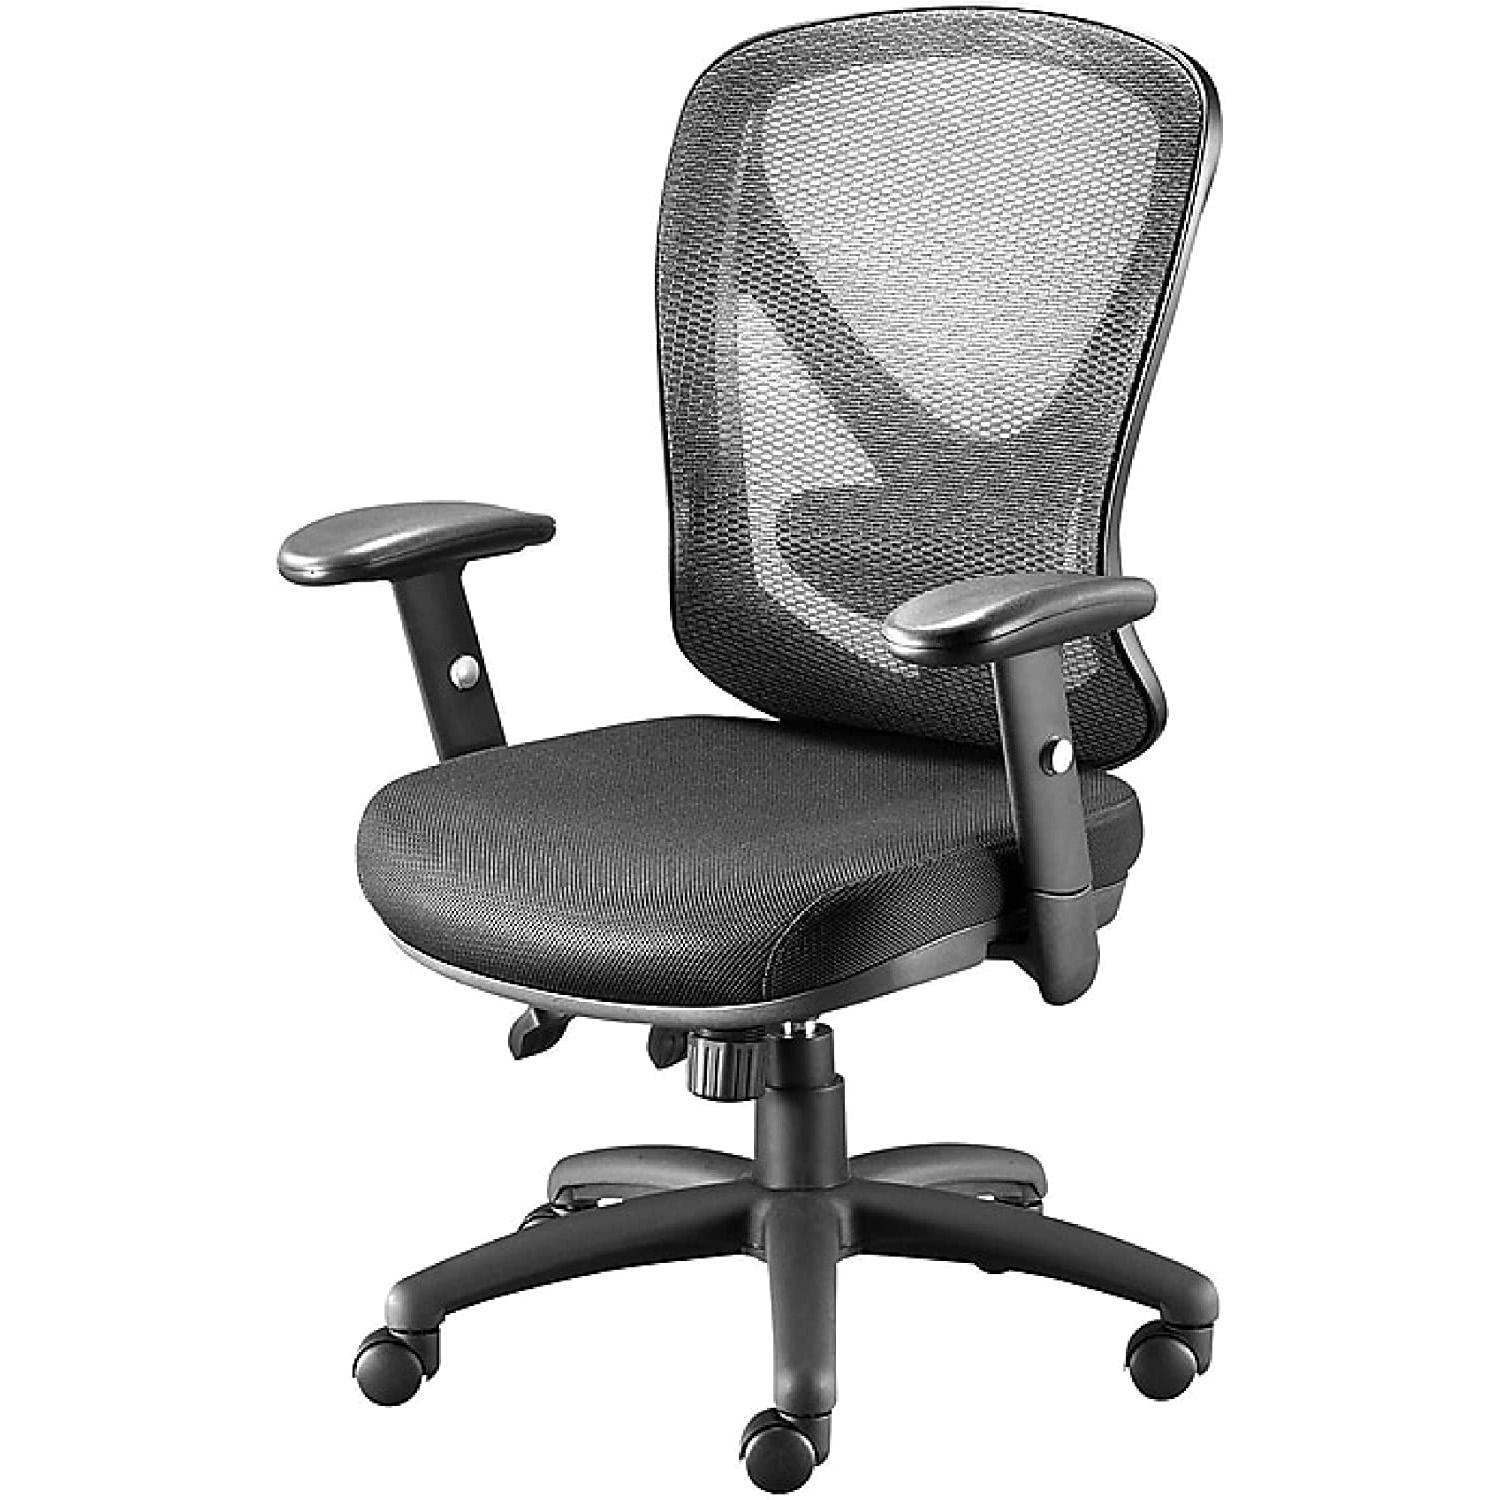 Staples Carder Mesh Back Fabric Desk Chair for $89.99 Shipped